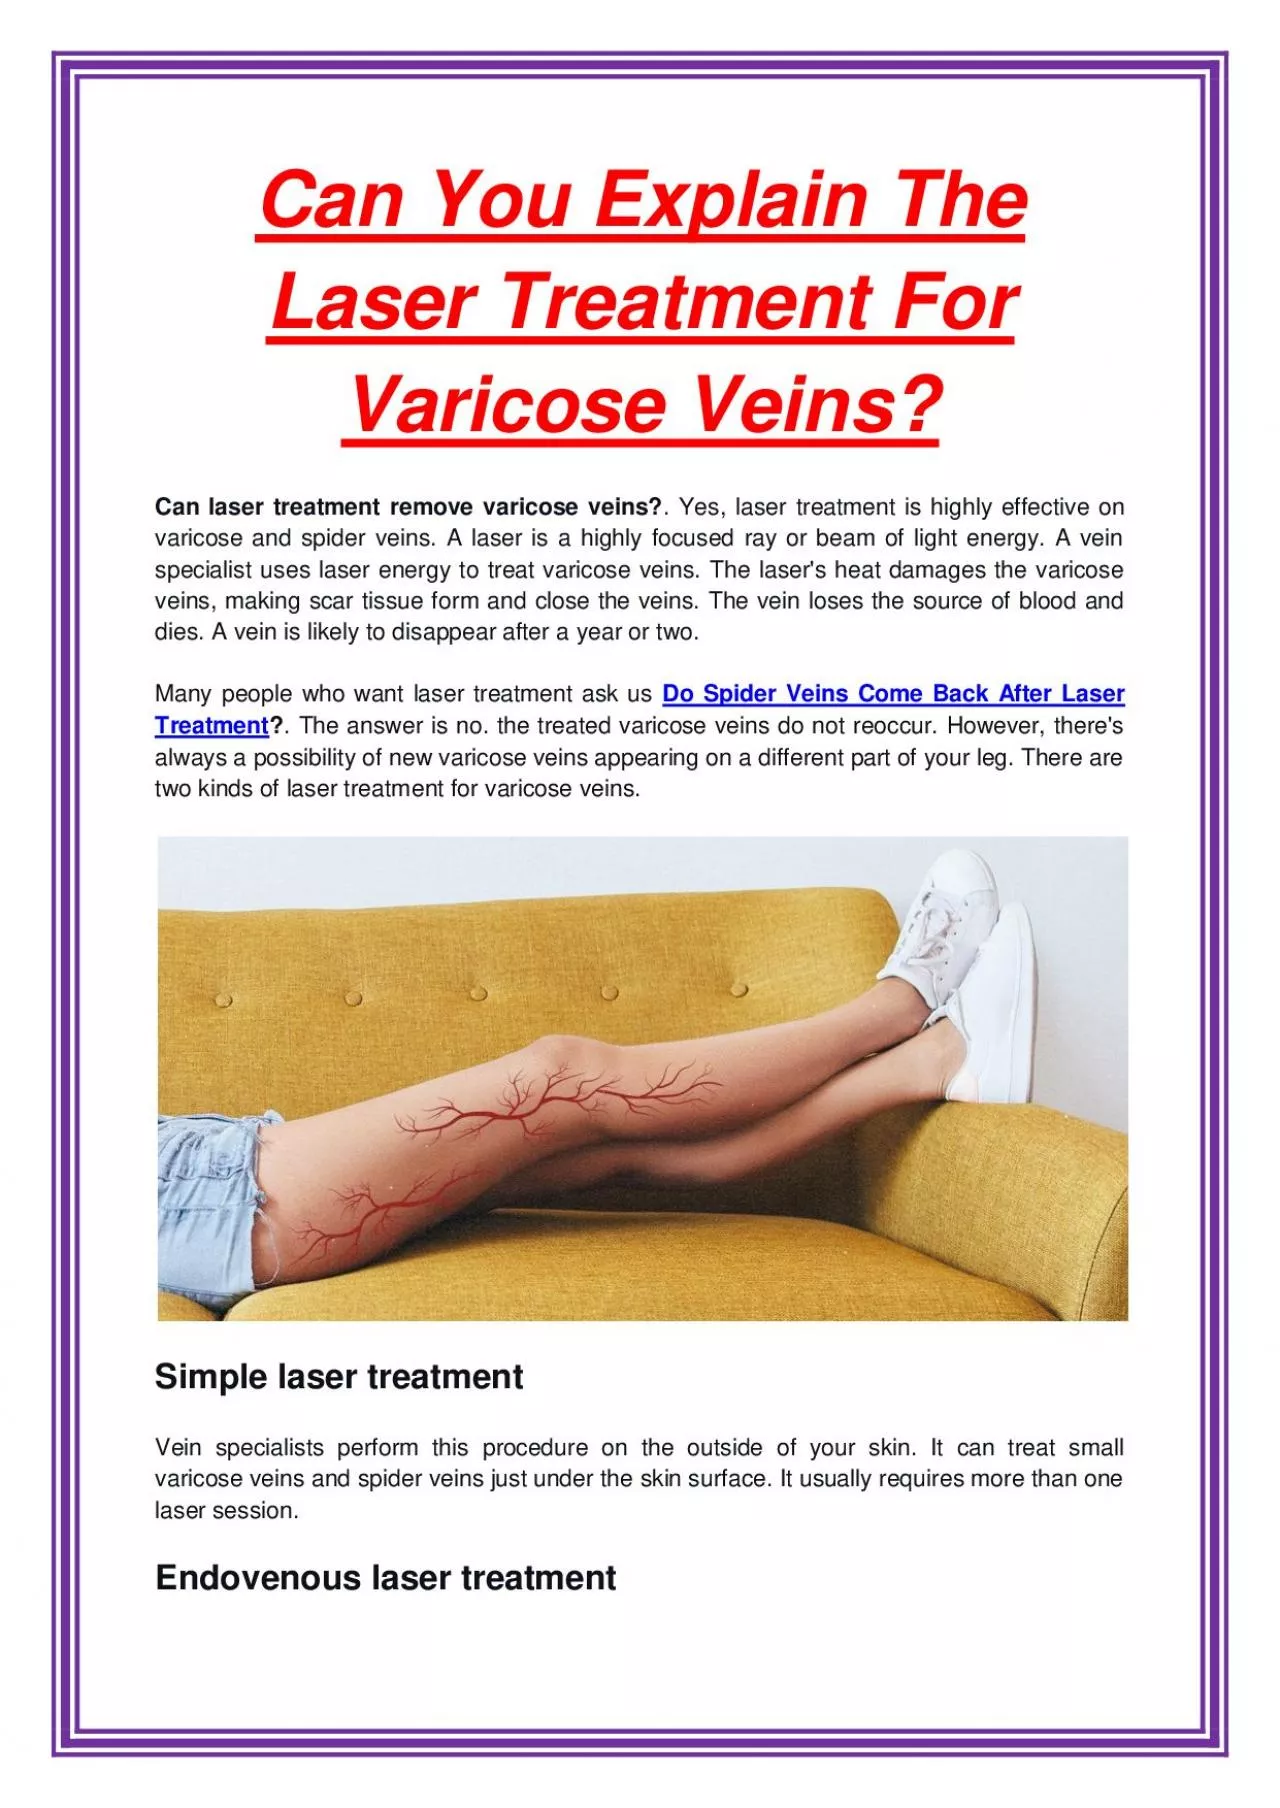 Can You Explain The Laser Treatment For Varicose Veins?